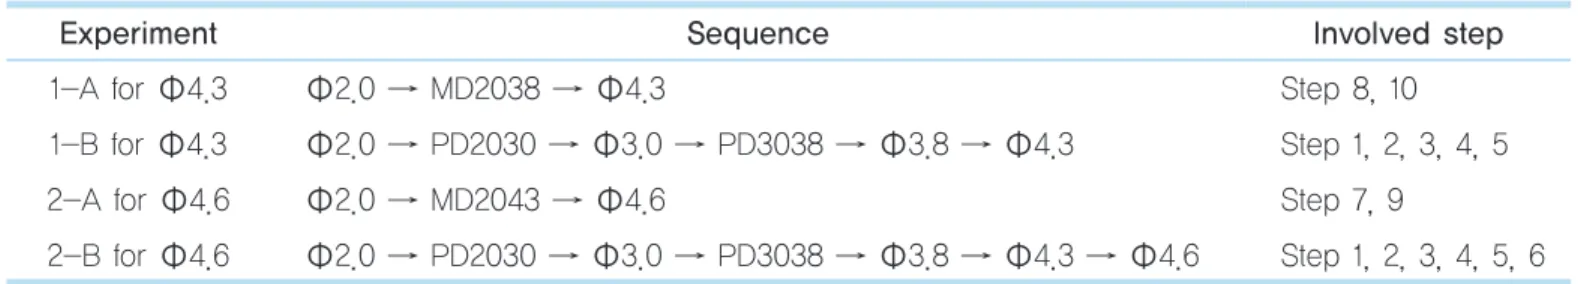 Table 2.  List of experimental and conventional sequences with involved step